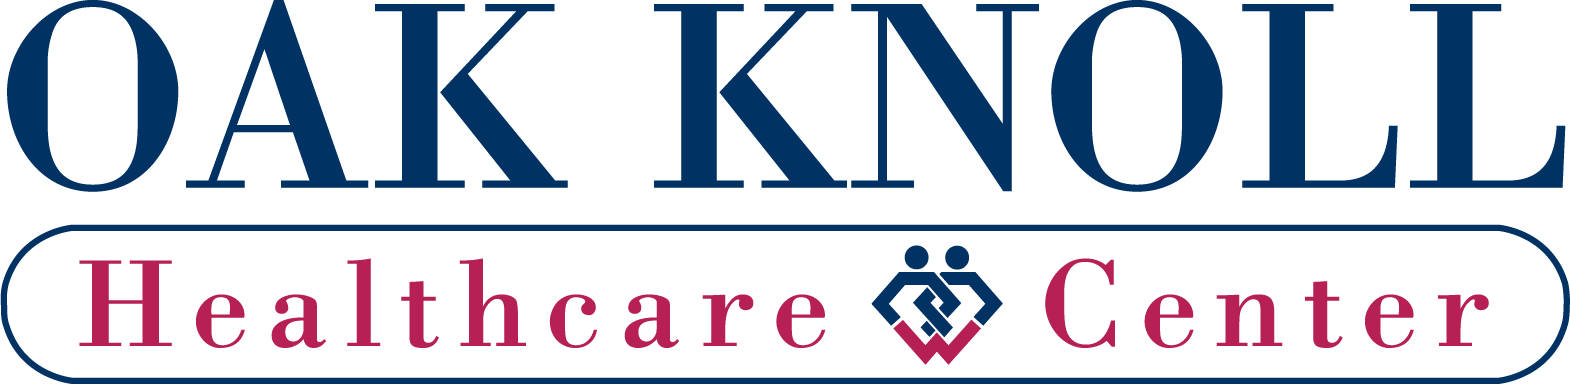 Review of Oak Knoll Healthcare Center nurses, &#8230;I had the opportunity to evaluate two nurses Bruna Campos and Bianca Iwamoto&#8230; to express myself about the excellent work carried out by both of them&#8230;